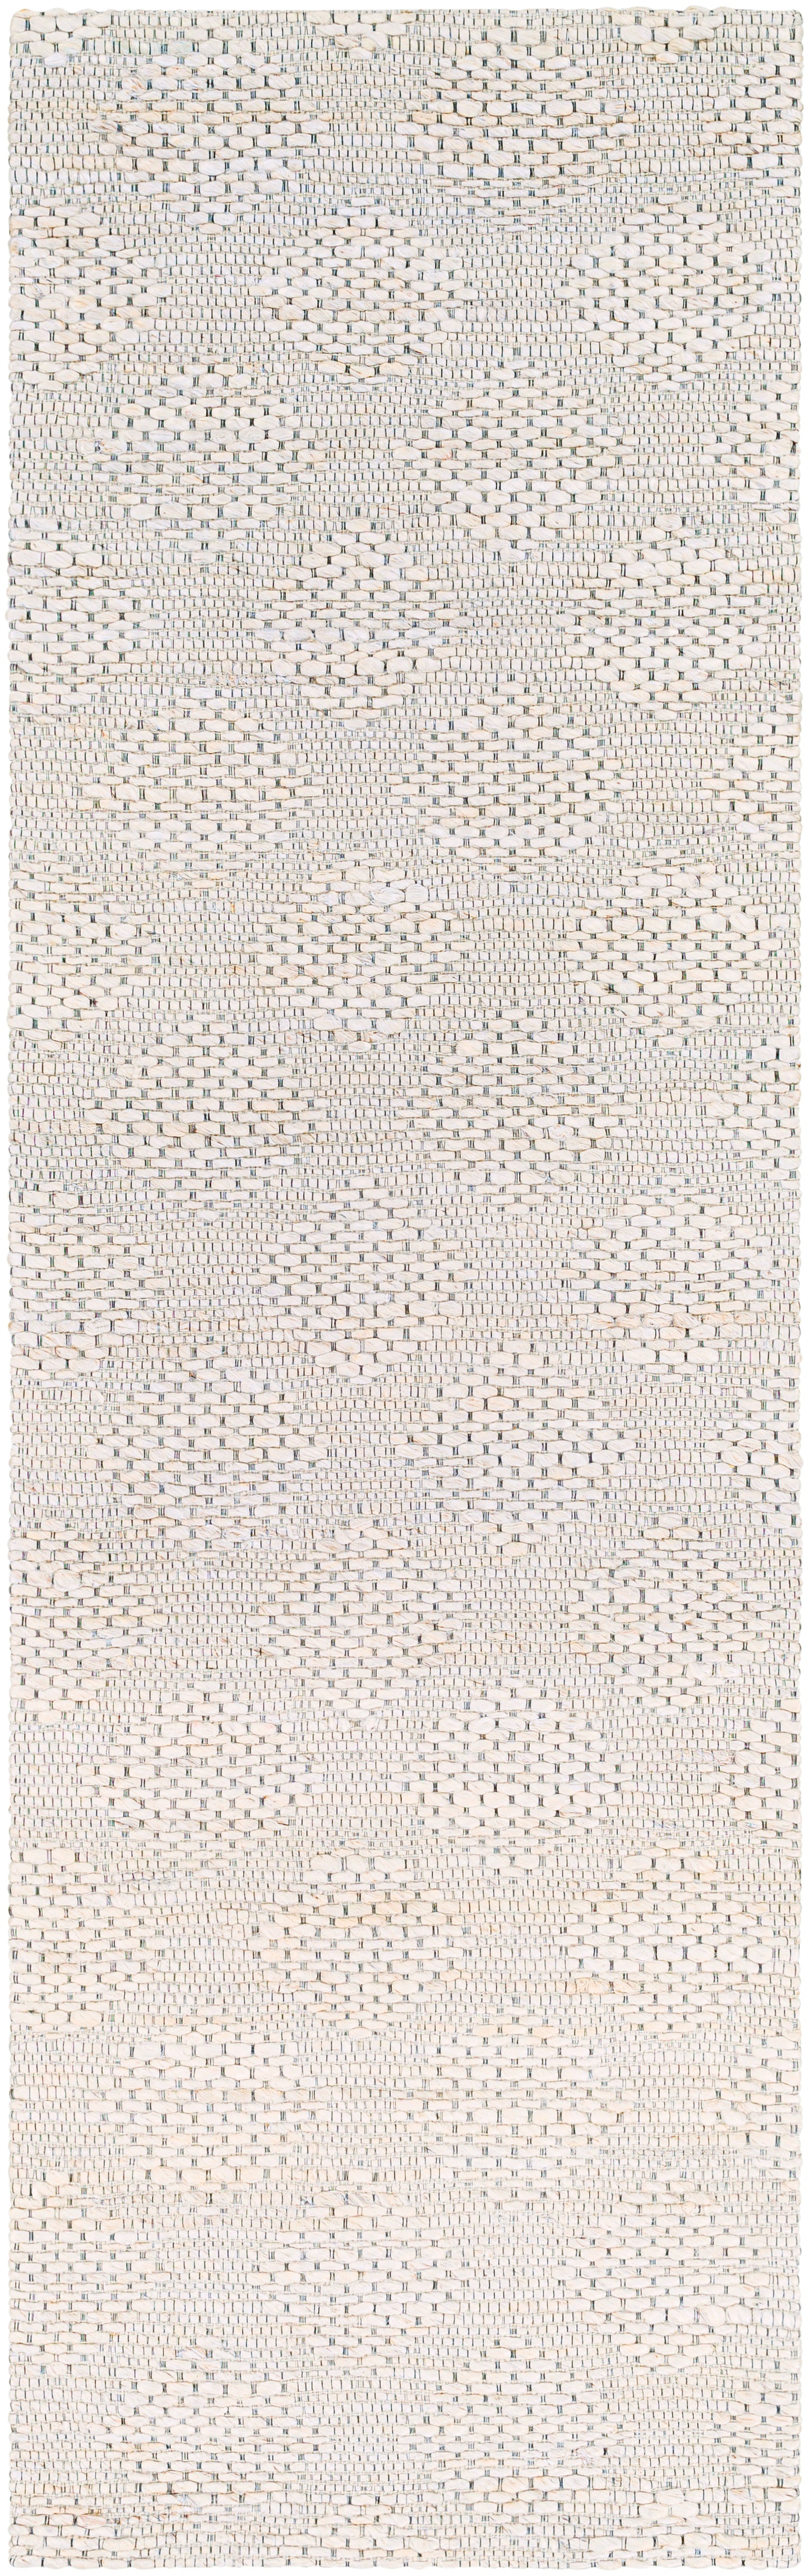 Trace 25949 Hand Woven Jute Indoor Area Rug by Surya Rugs